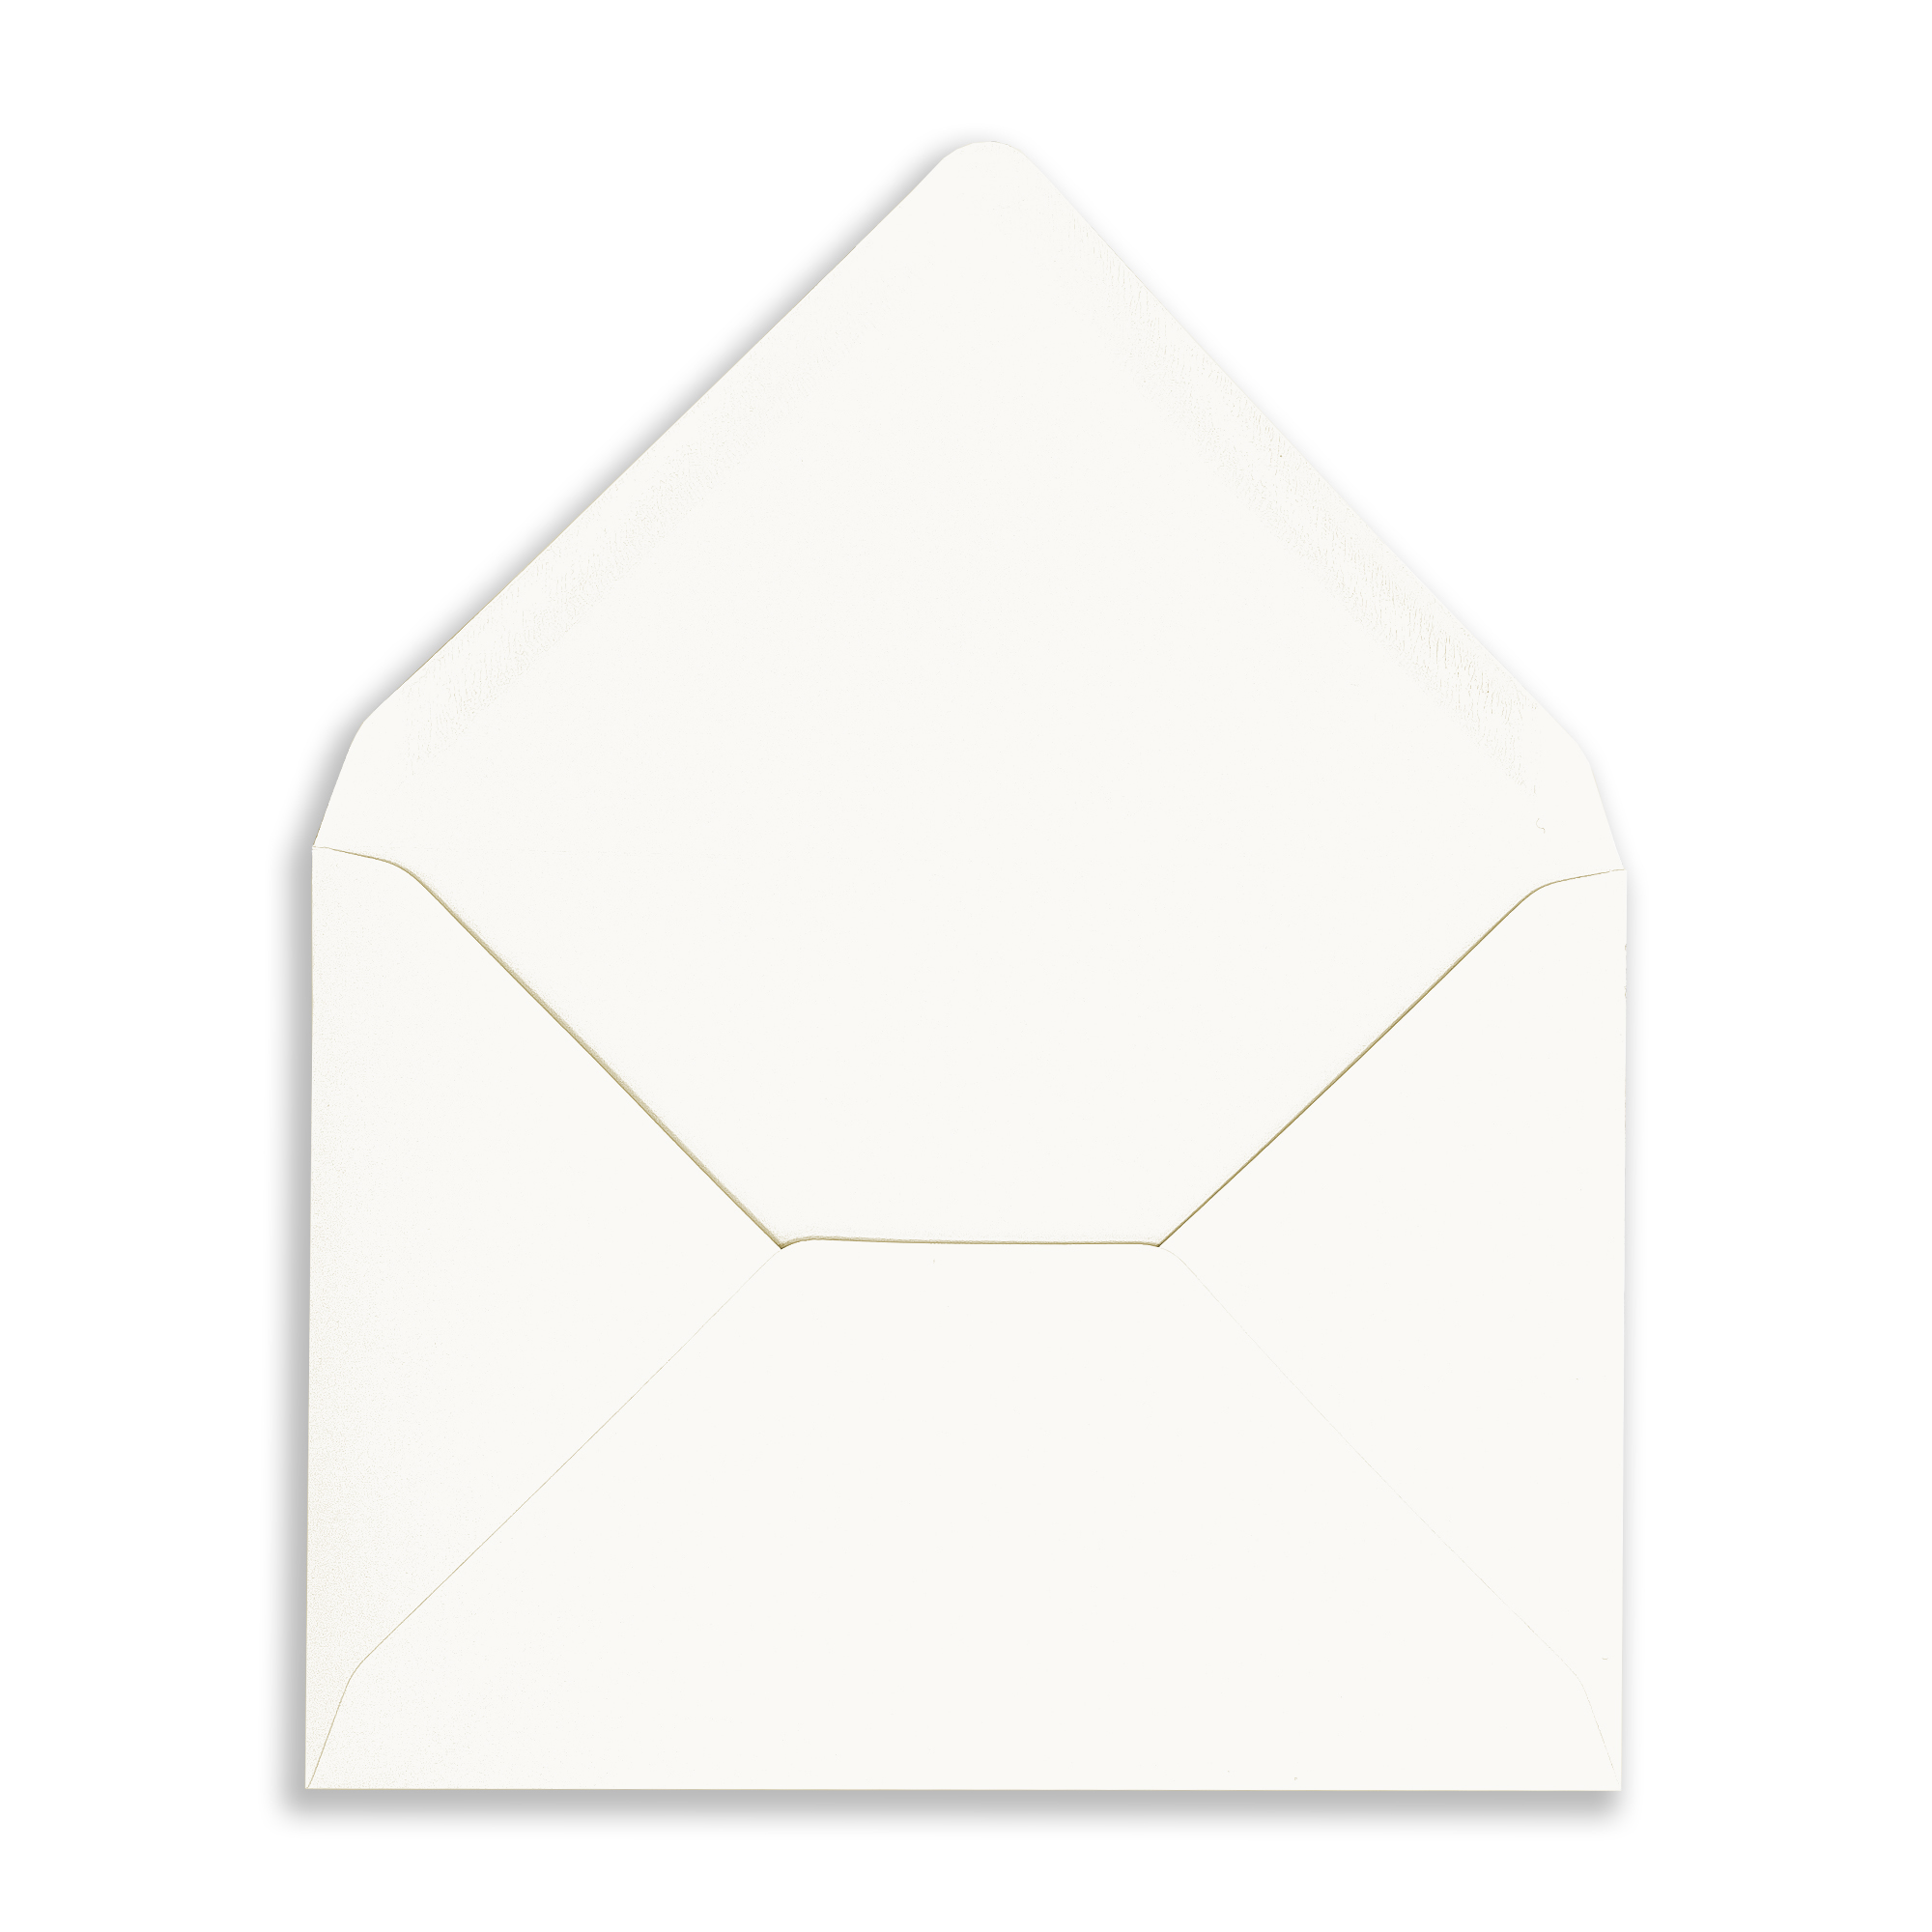 butterfly-smooth_C6_Envelope_OpenFlap